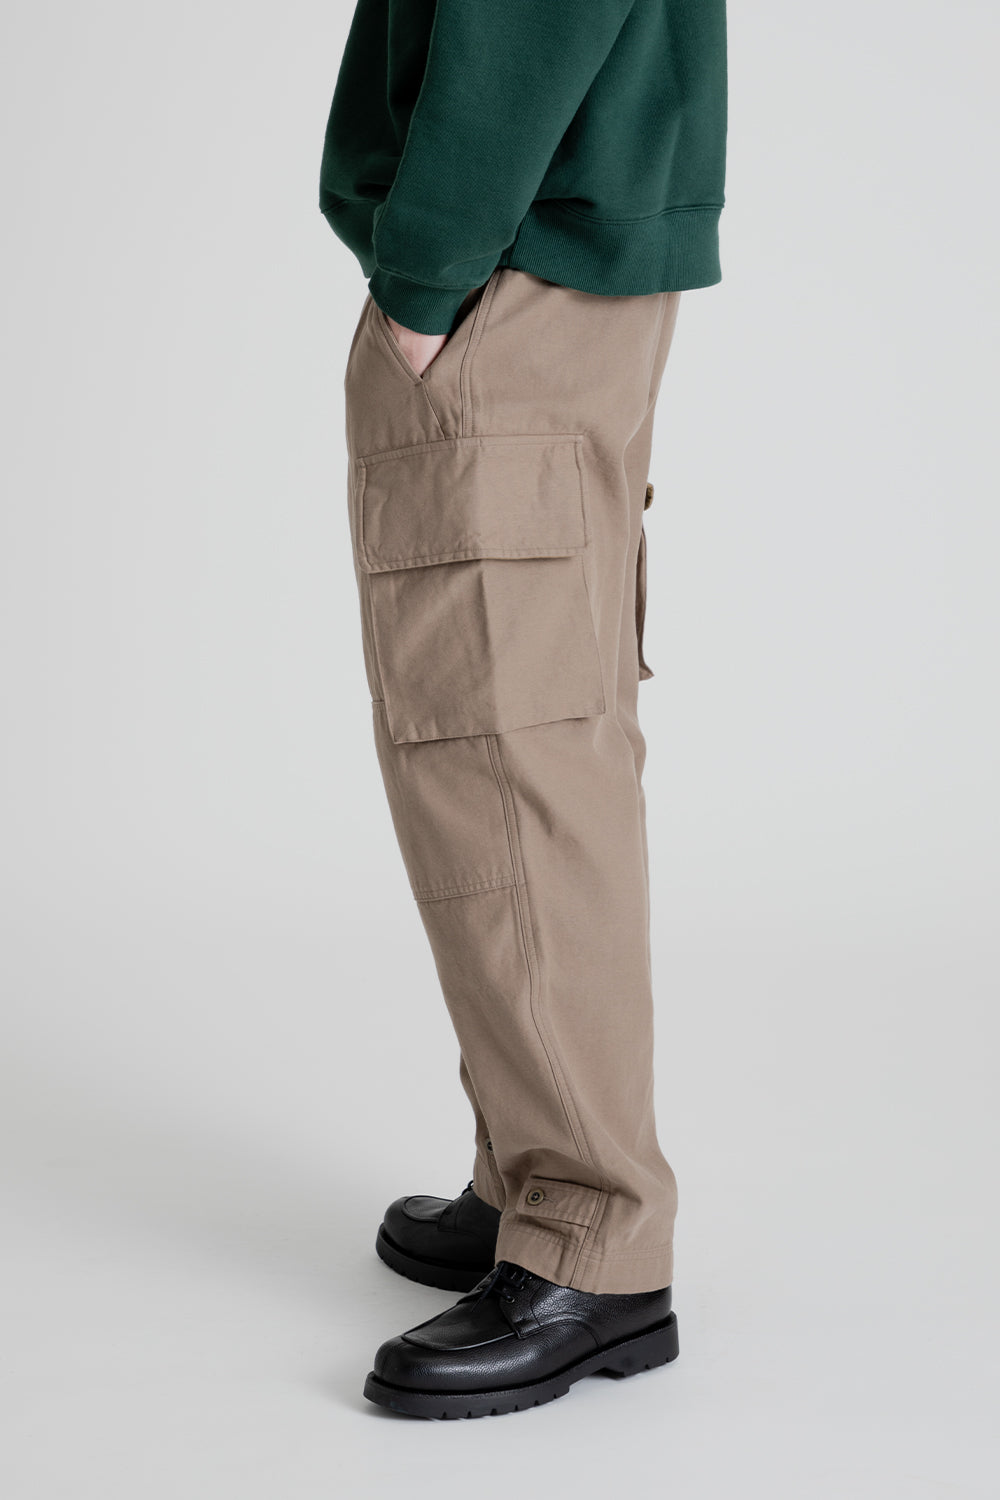 M47 French Army Pants - Stone Brown